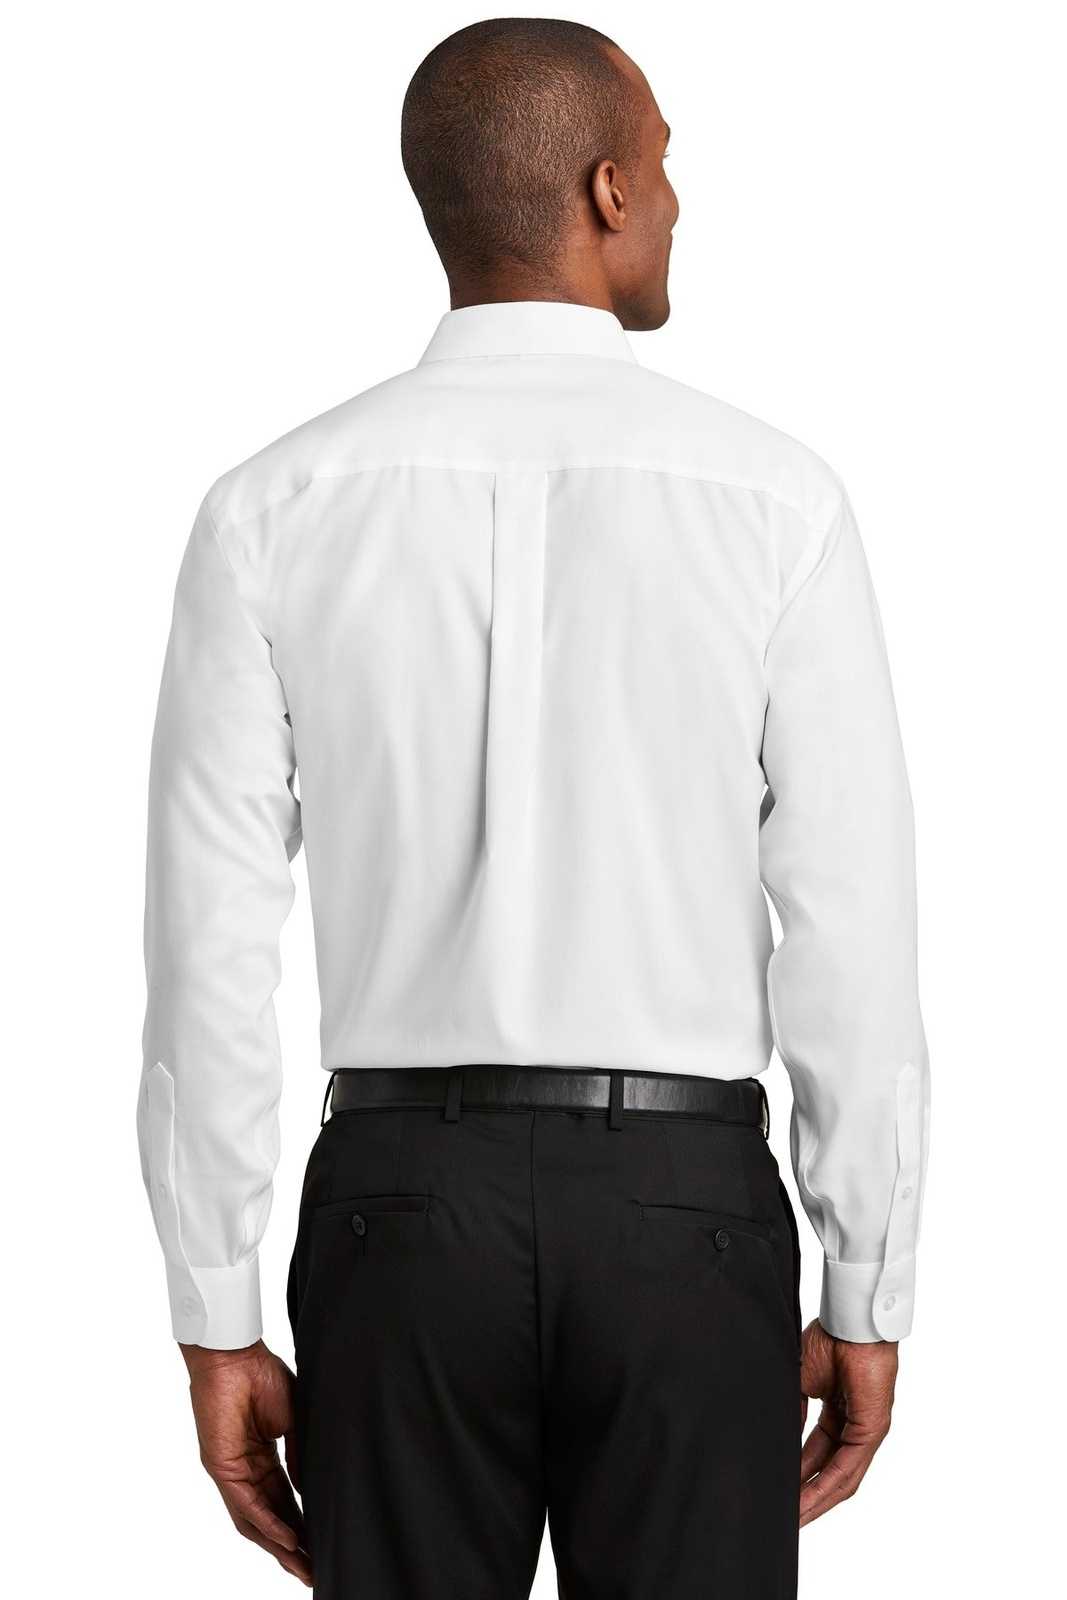 Red House RH240 Pinpoint Oxford Non-Iron Shirt - White - HIT a Double - 1